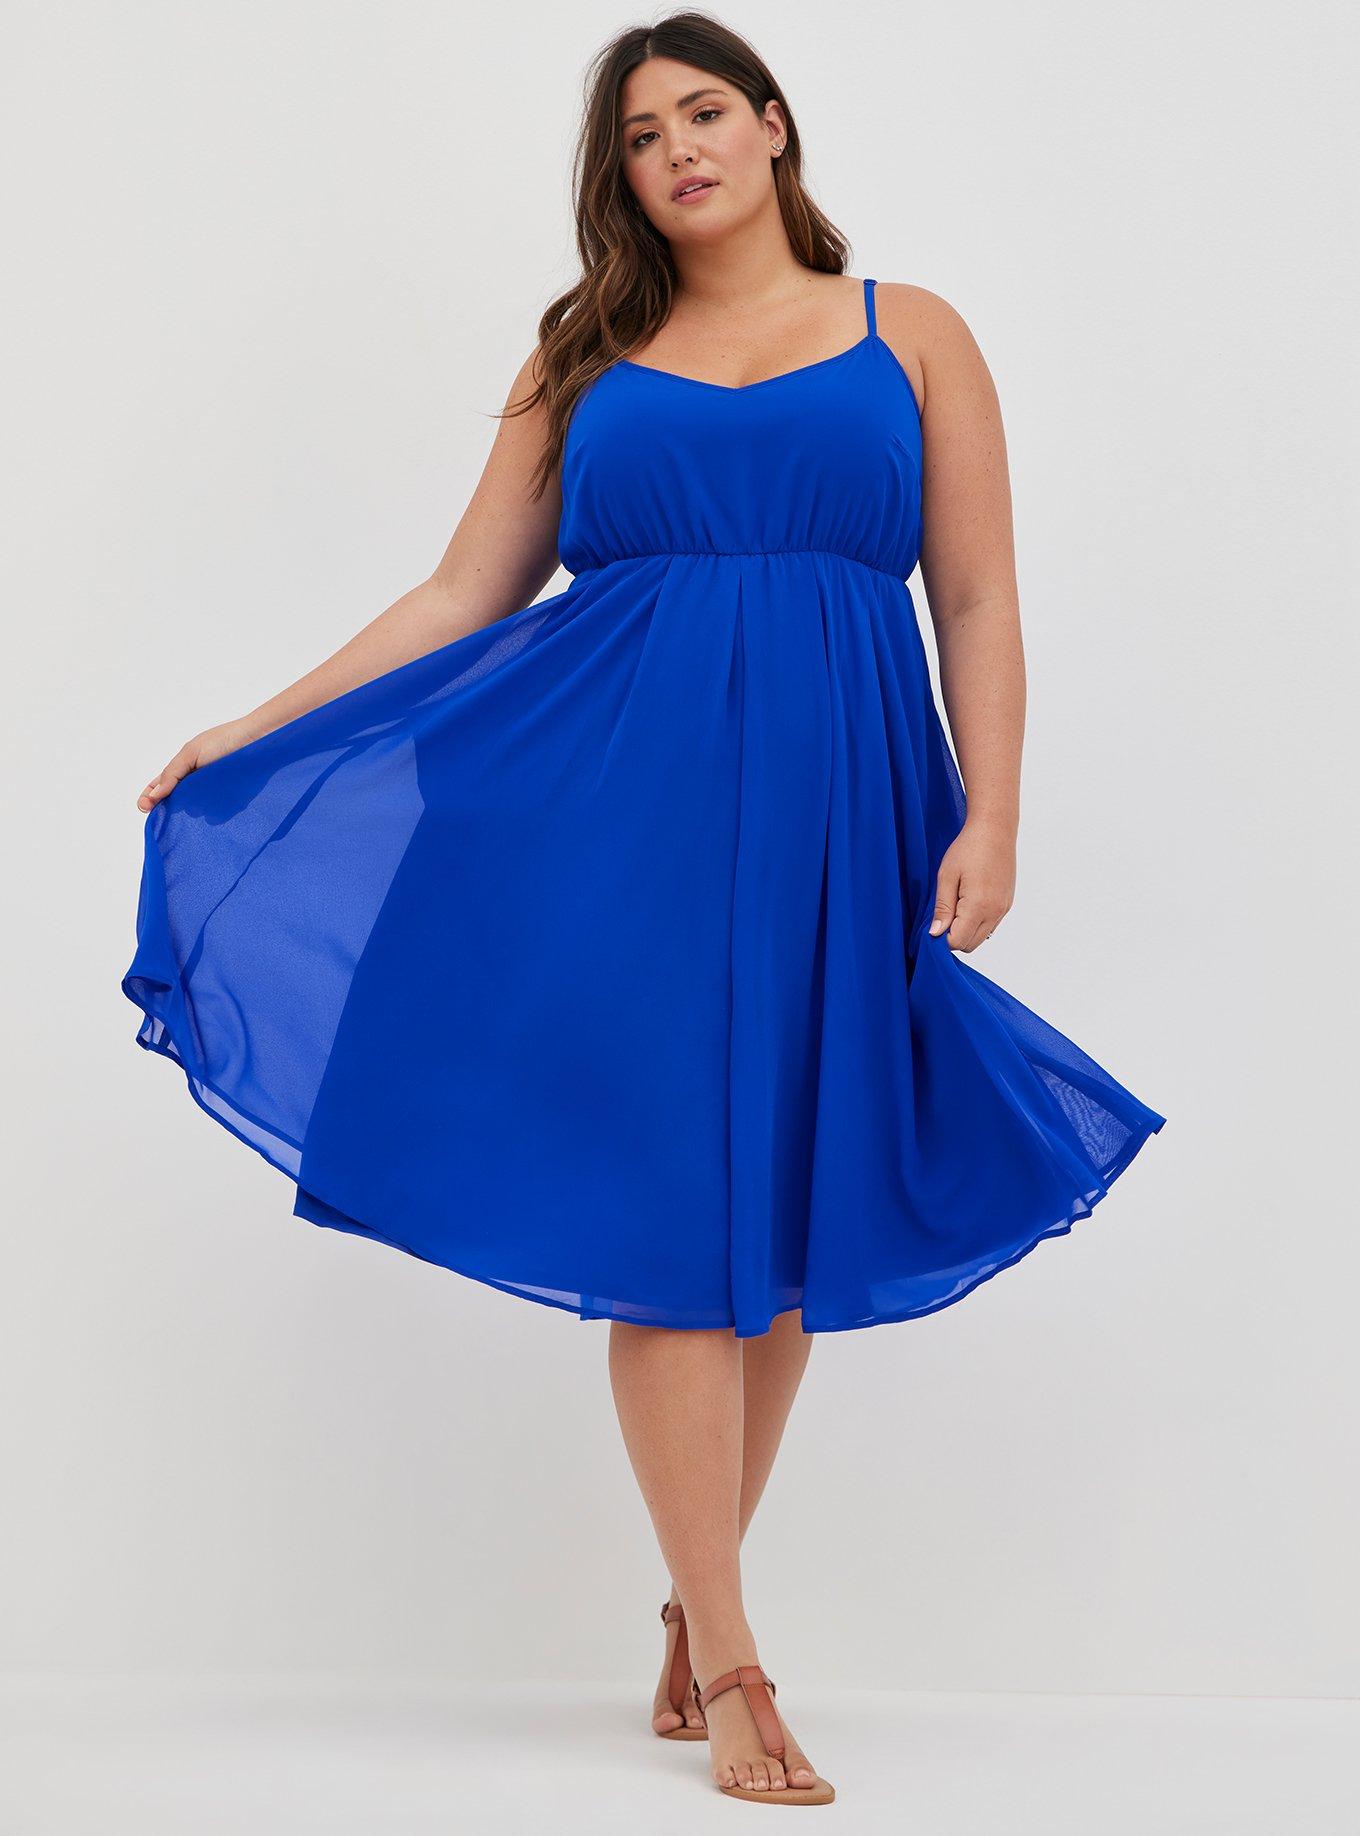 Torrid Plus Size Women's Clothing for sale in Montreal, Quebec